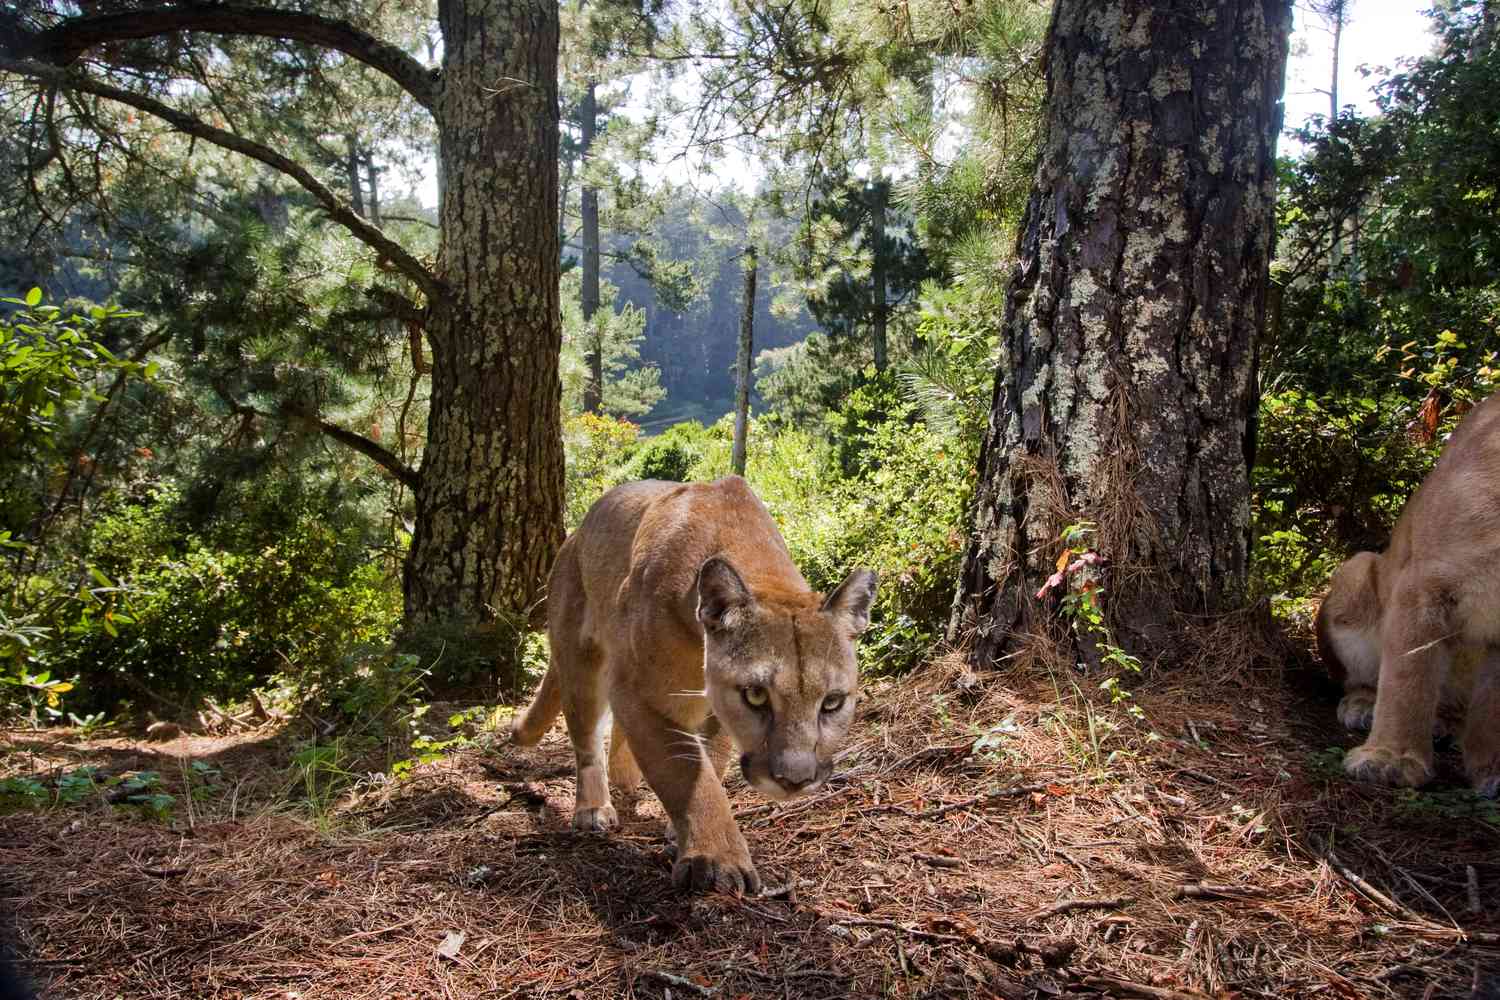 How Do Mountain Lions Adapt to Their Environment